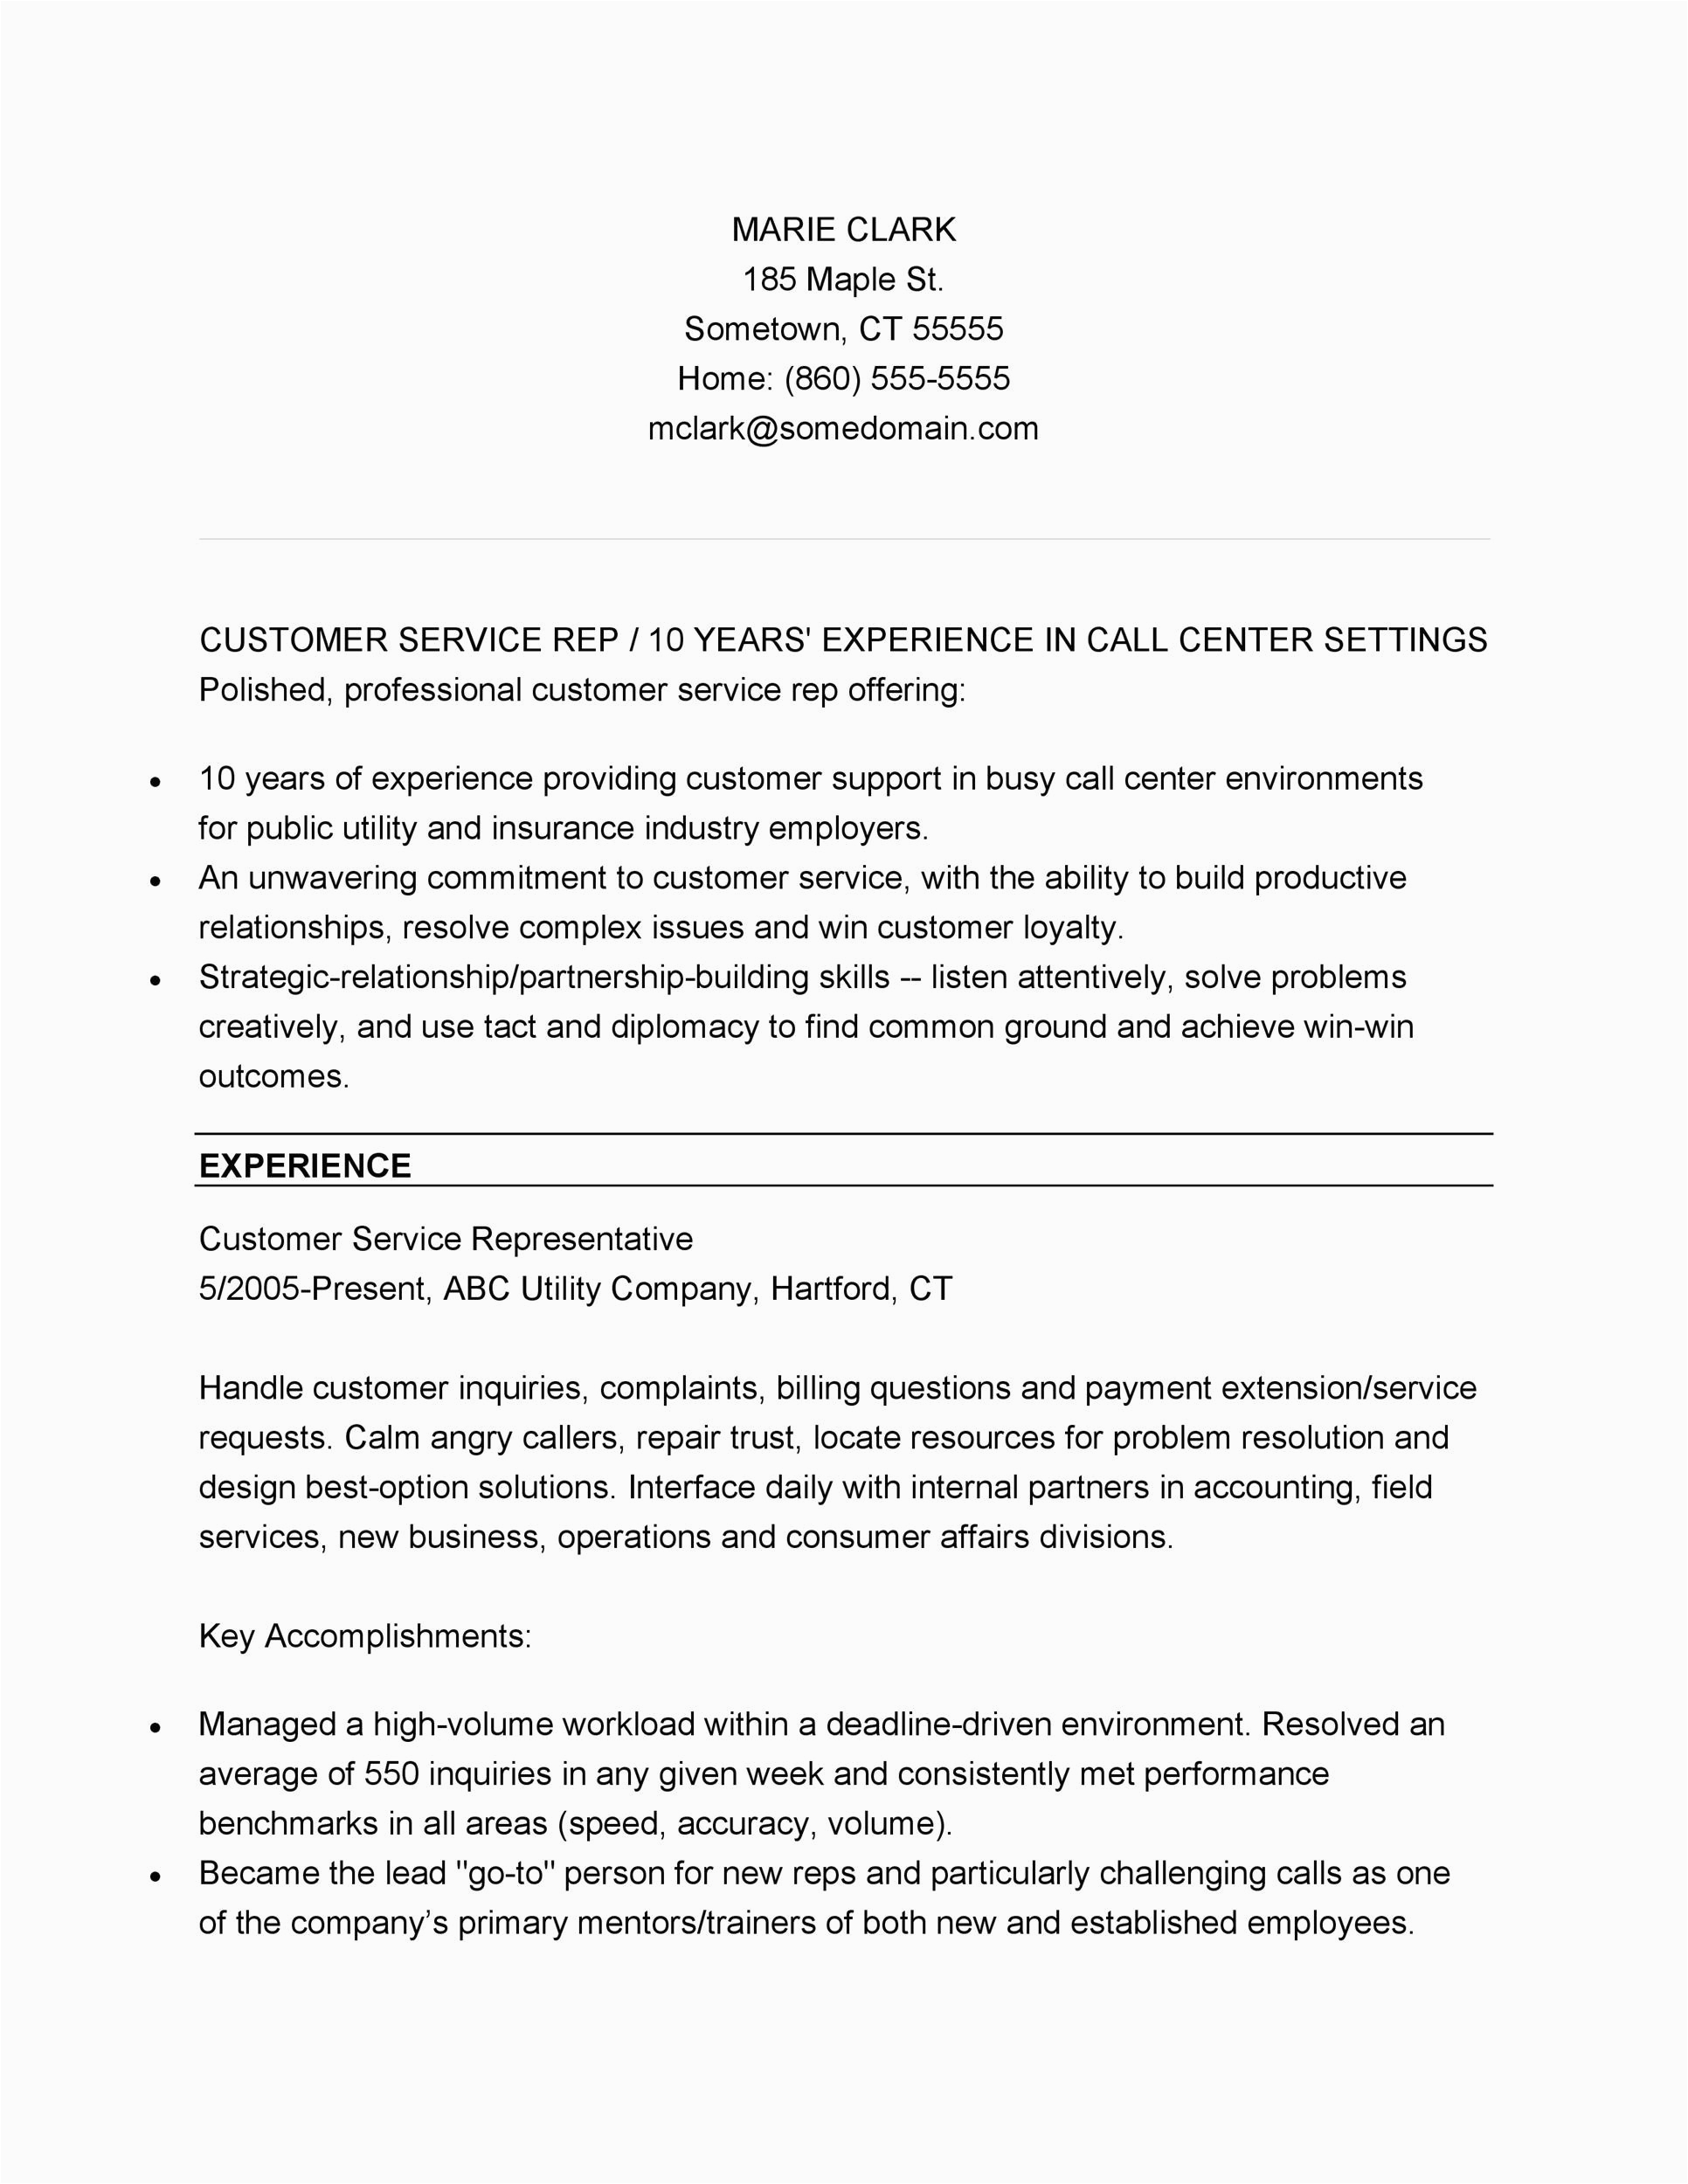 Samples Of Functional Resumes Customer Service 30 Customer Service Resume Examples Templatelab